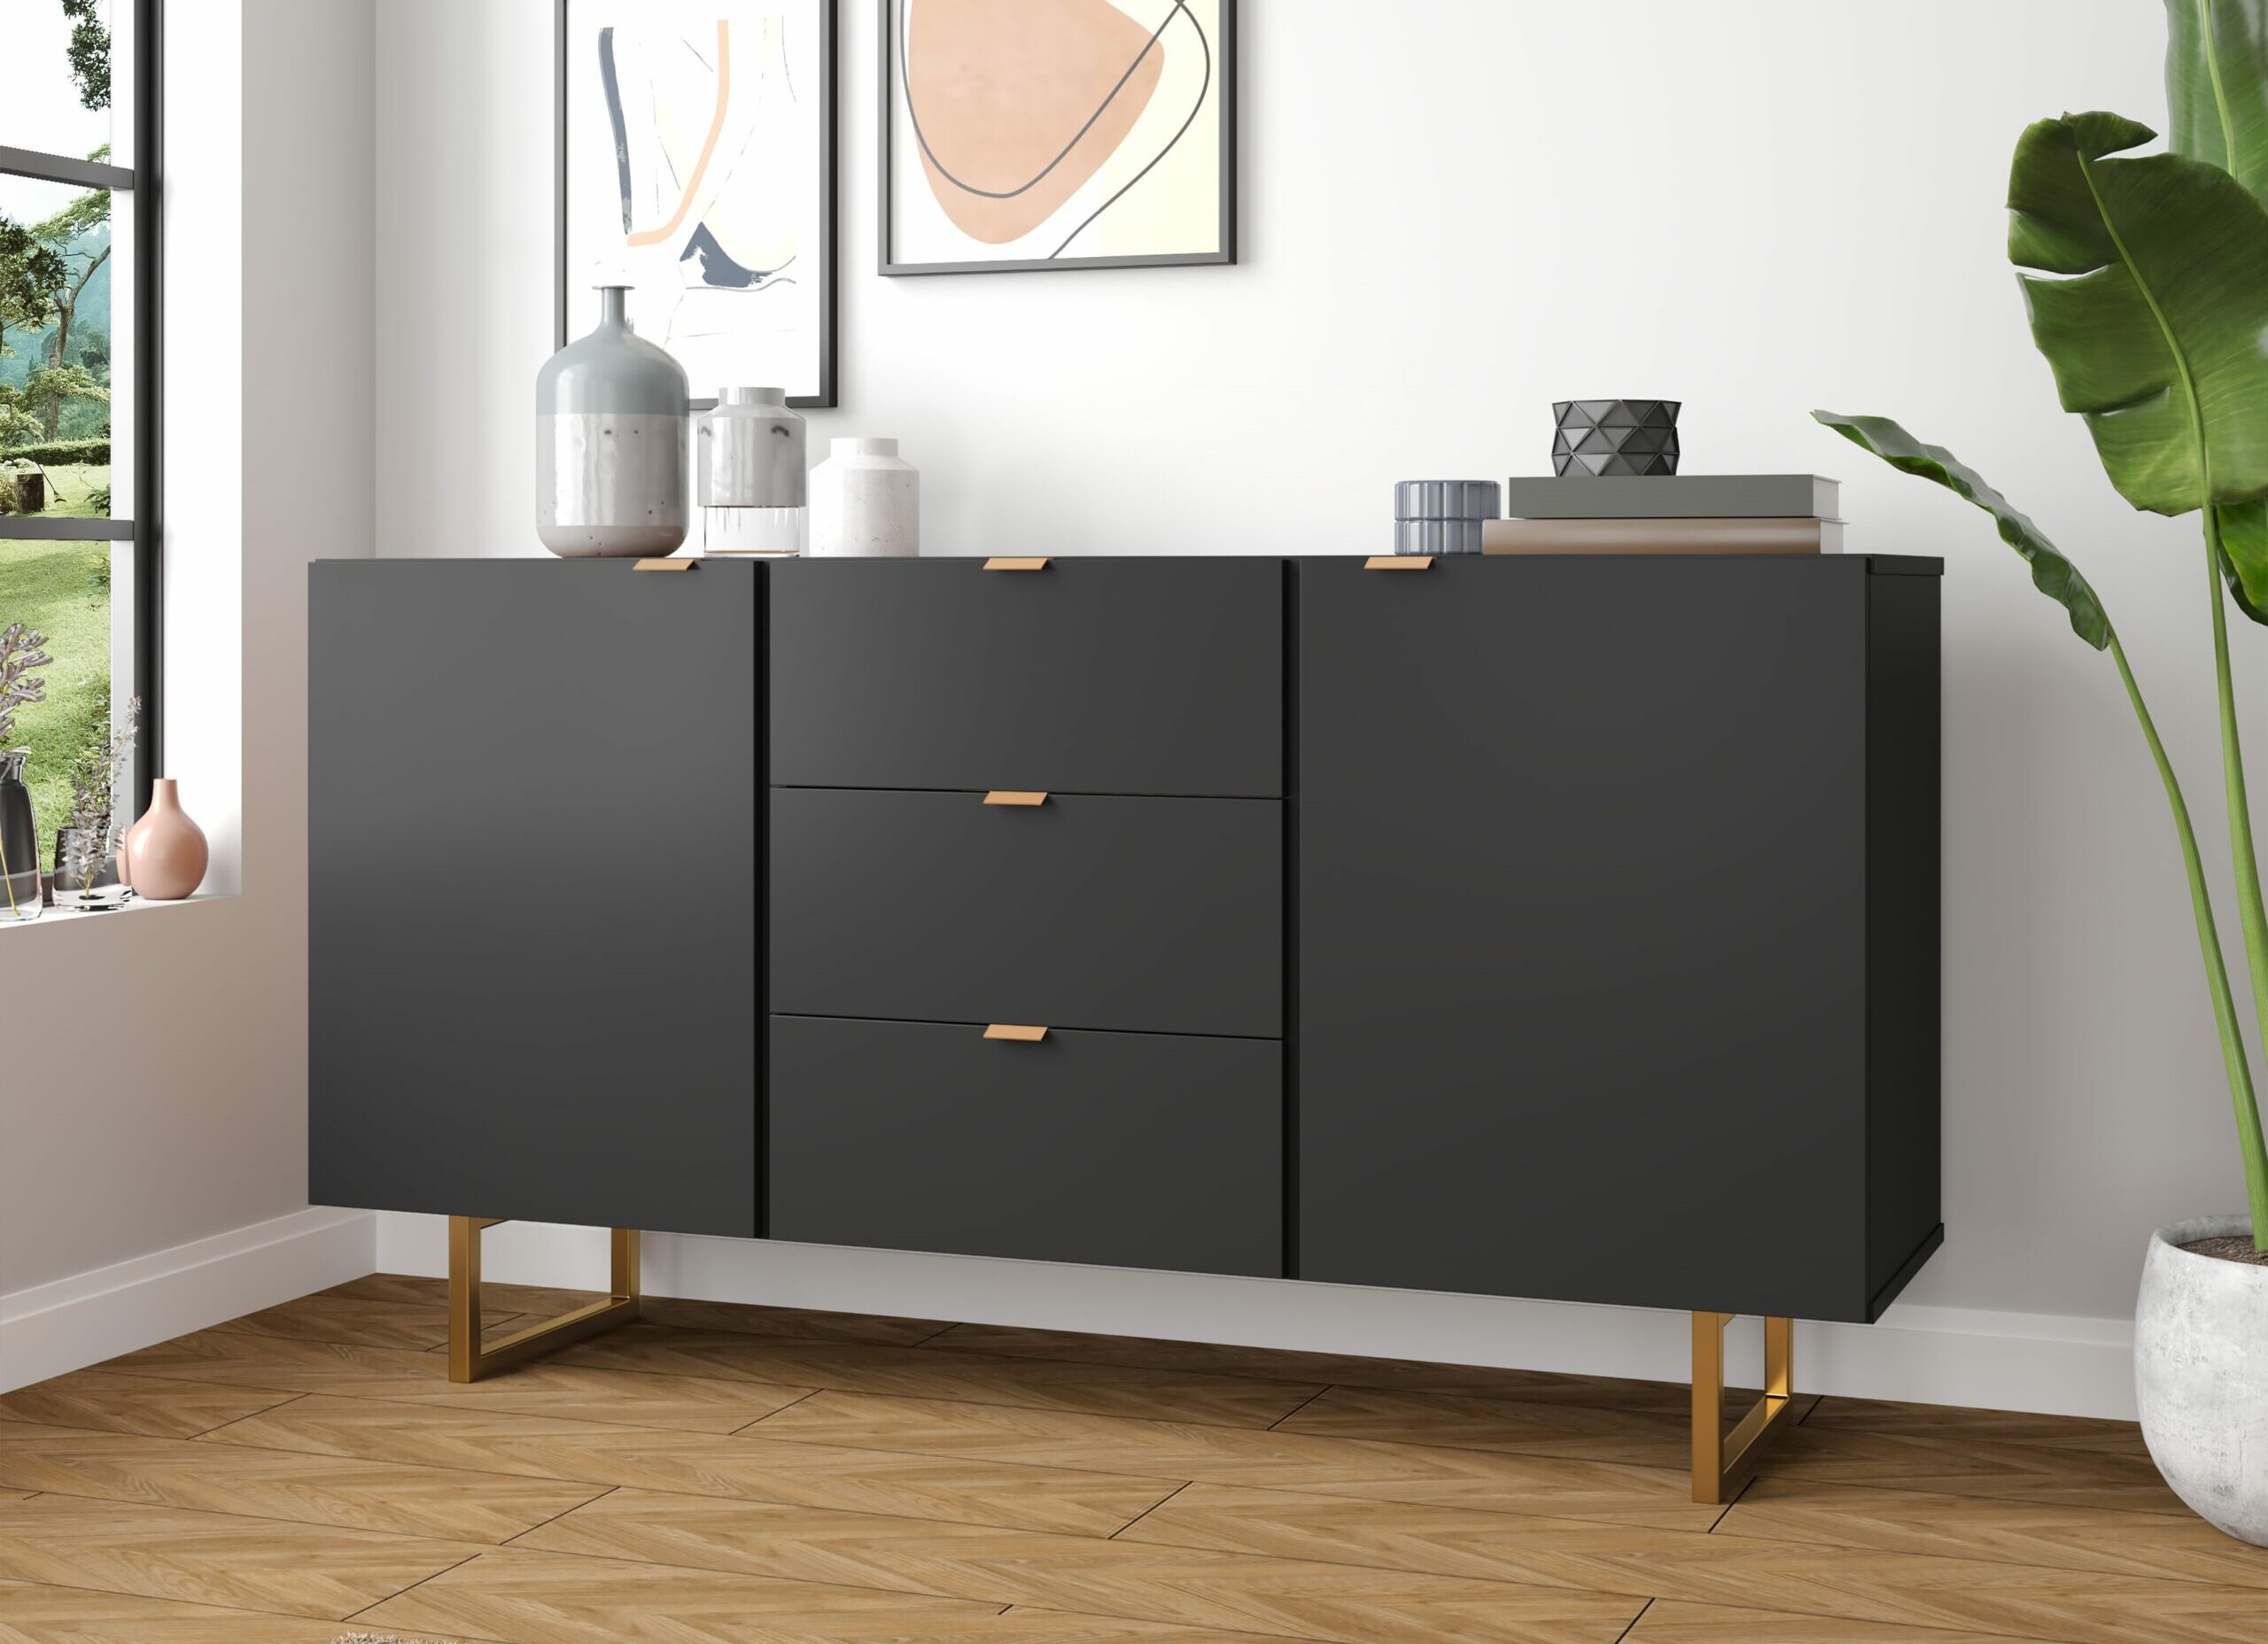 Out and Out Seattle-Black-Sideboard - just one of the products being delivered by Panther